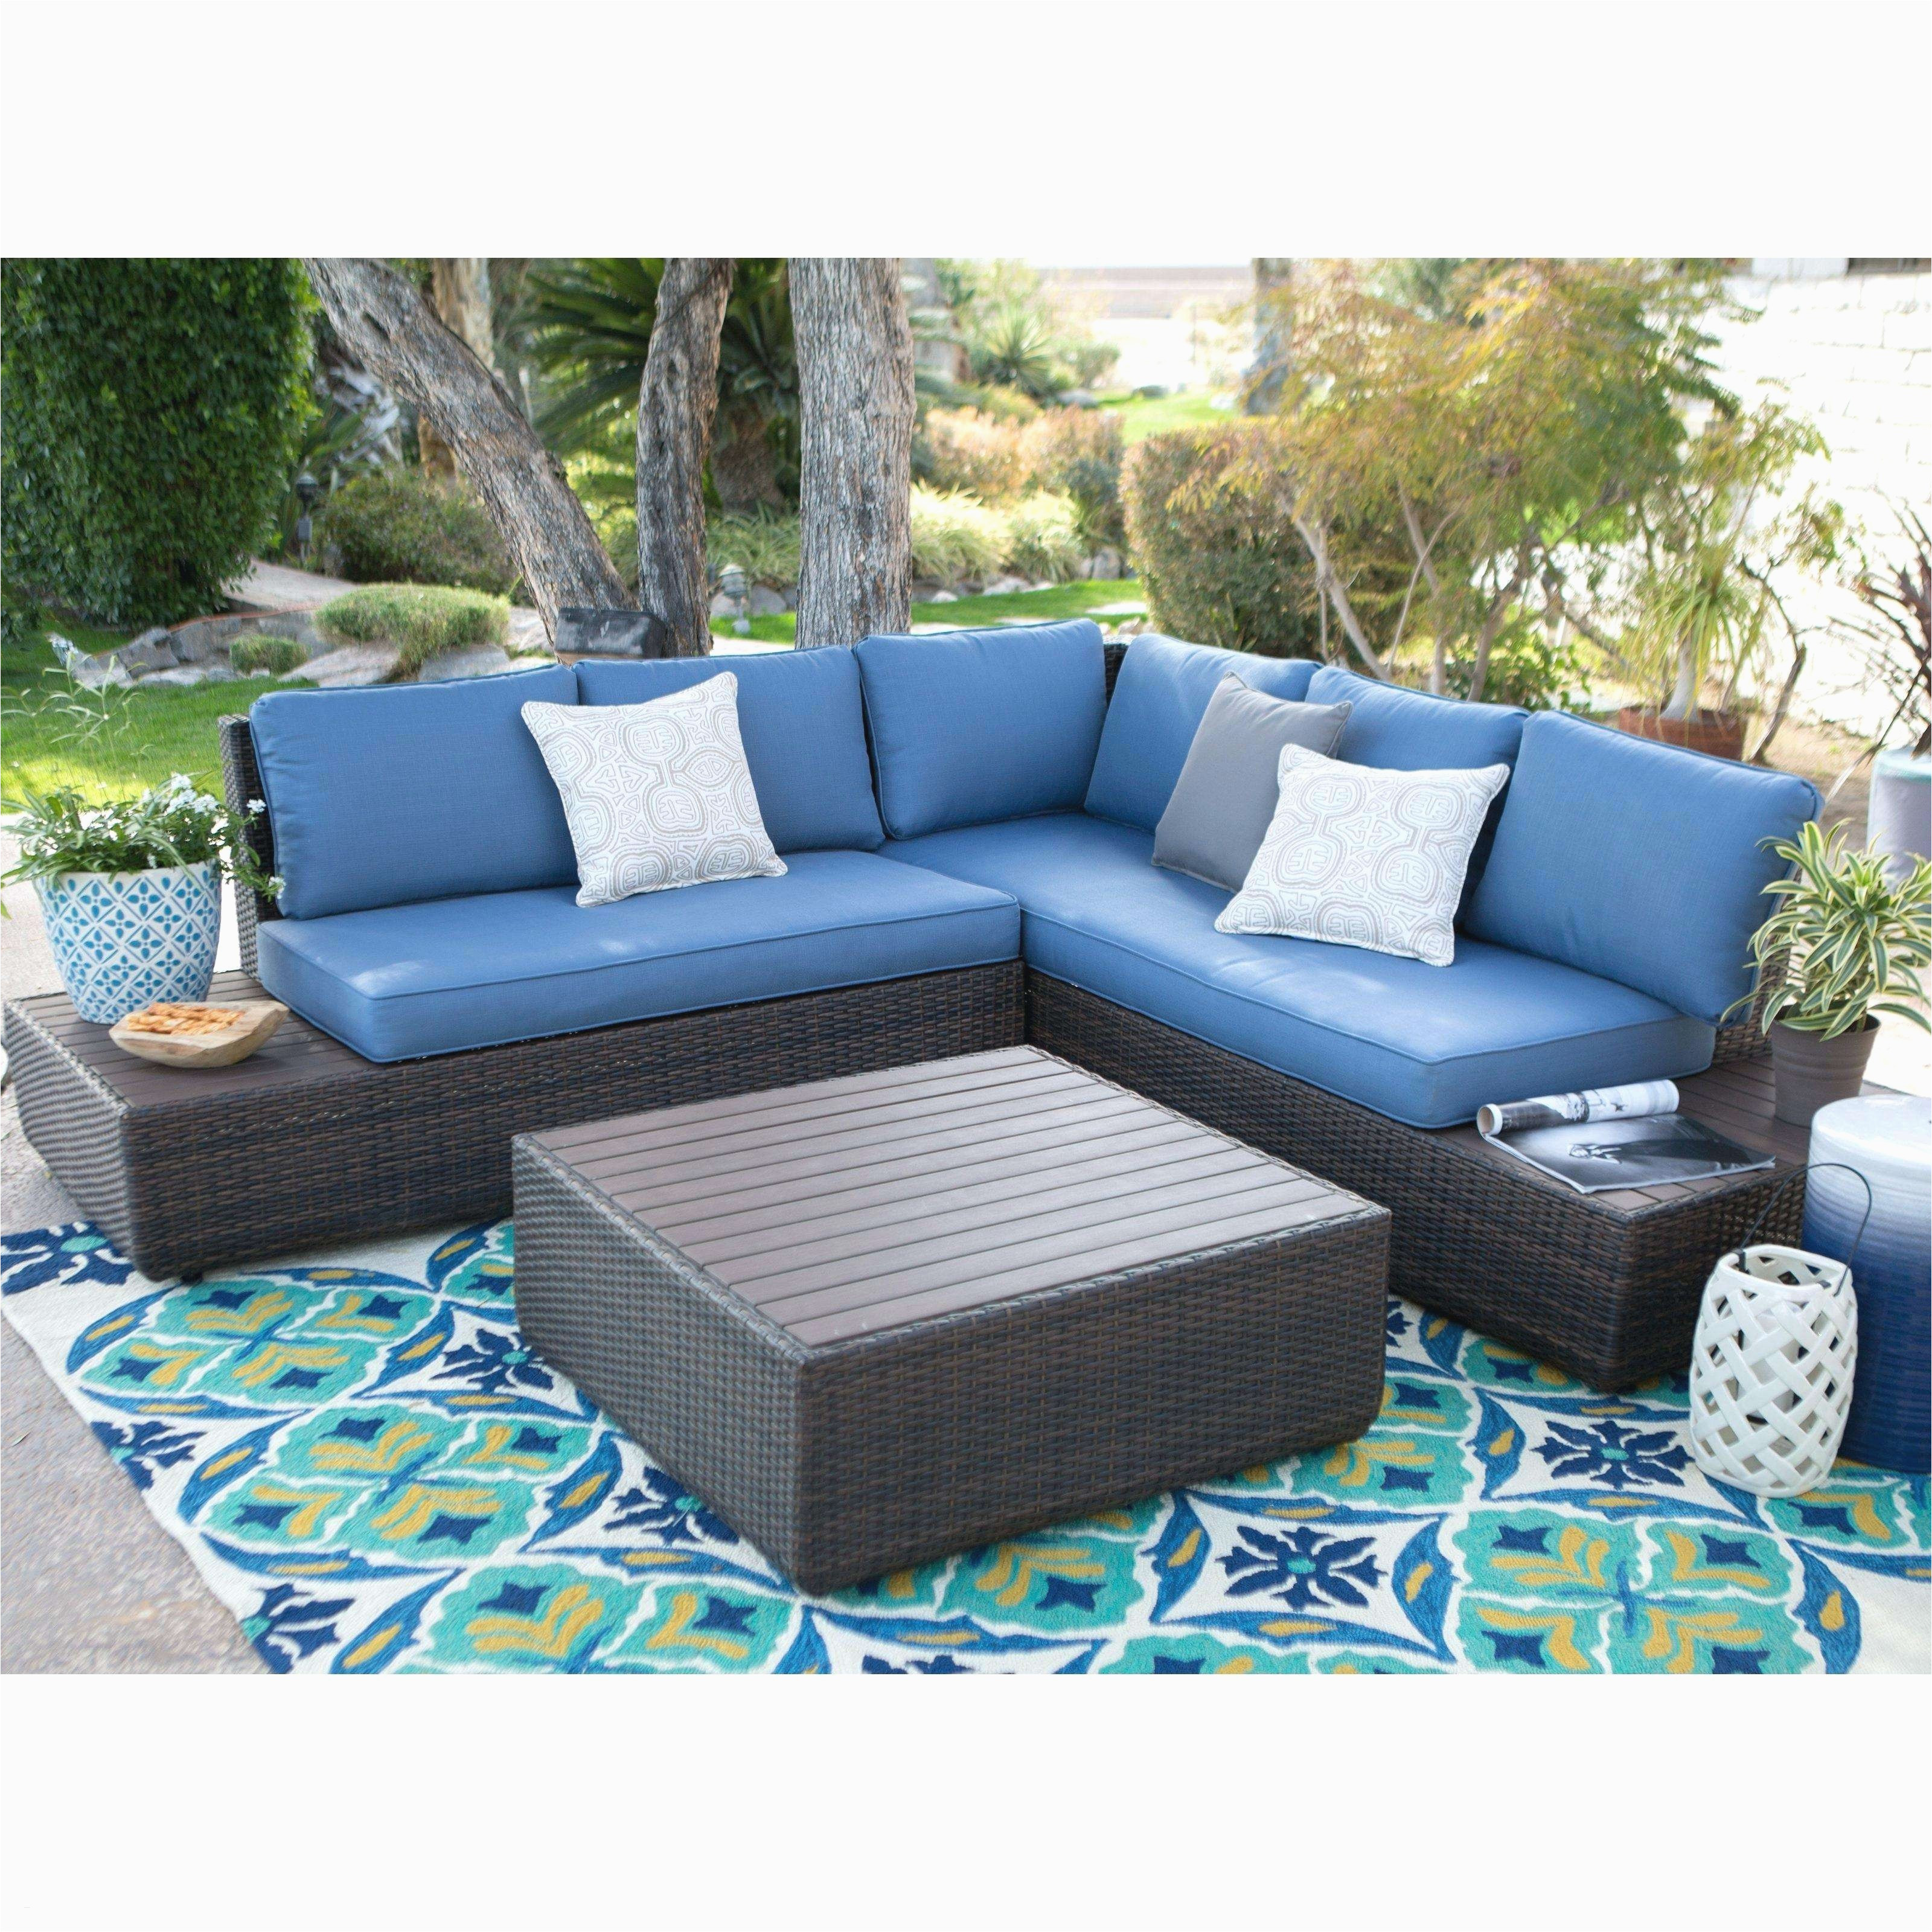 outdoor furniture miami awesome turquoise patio furniture beautiful wicker outdoor sofa 0d patio